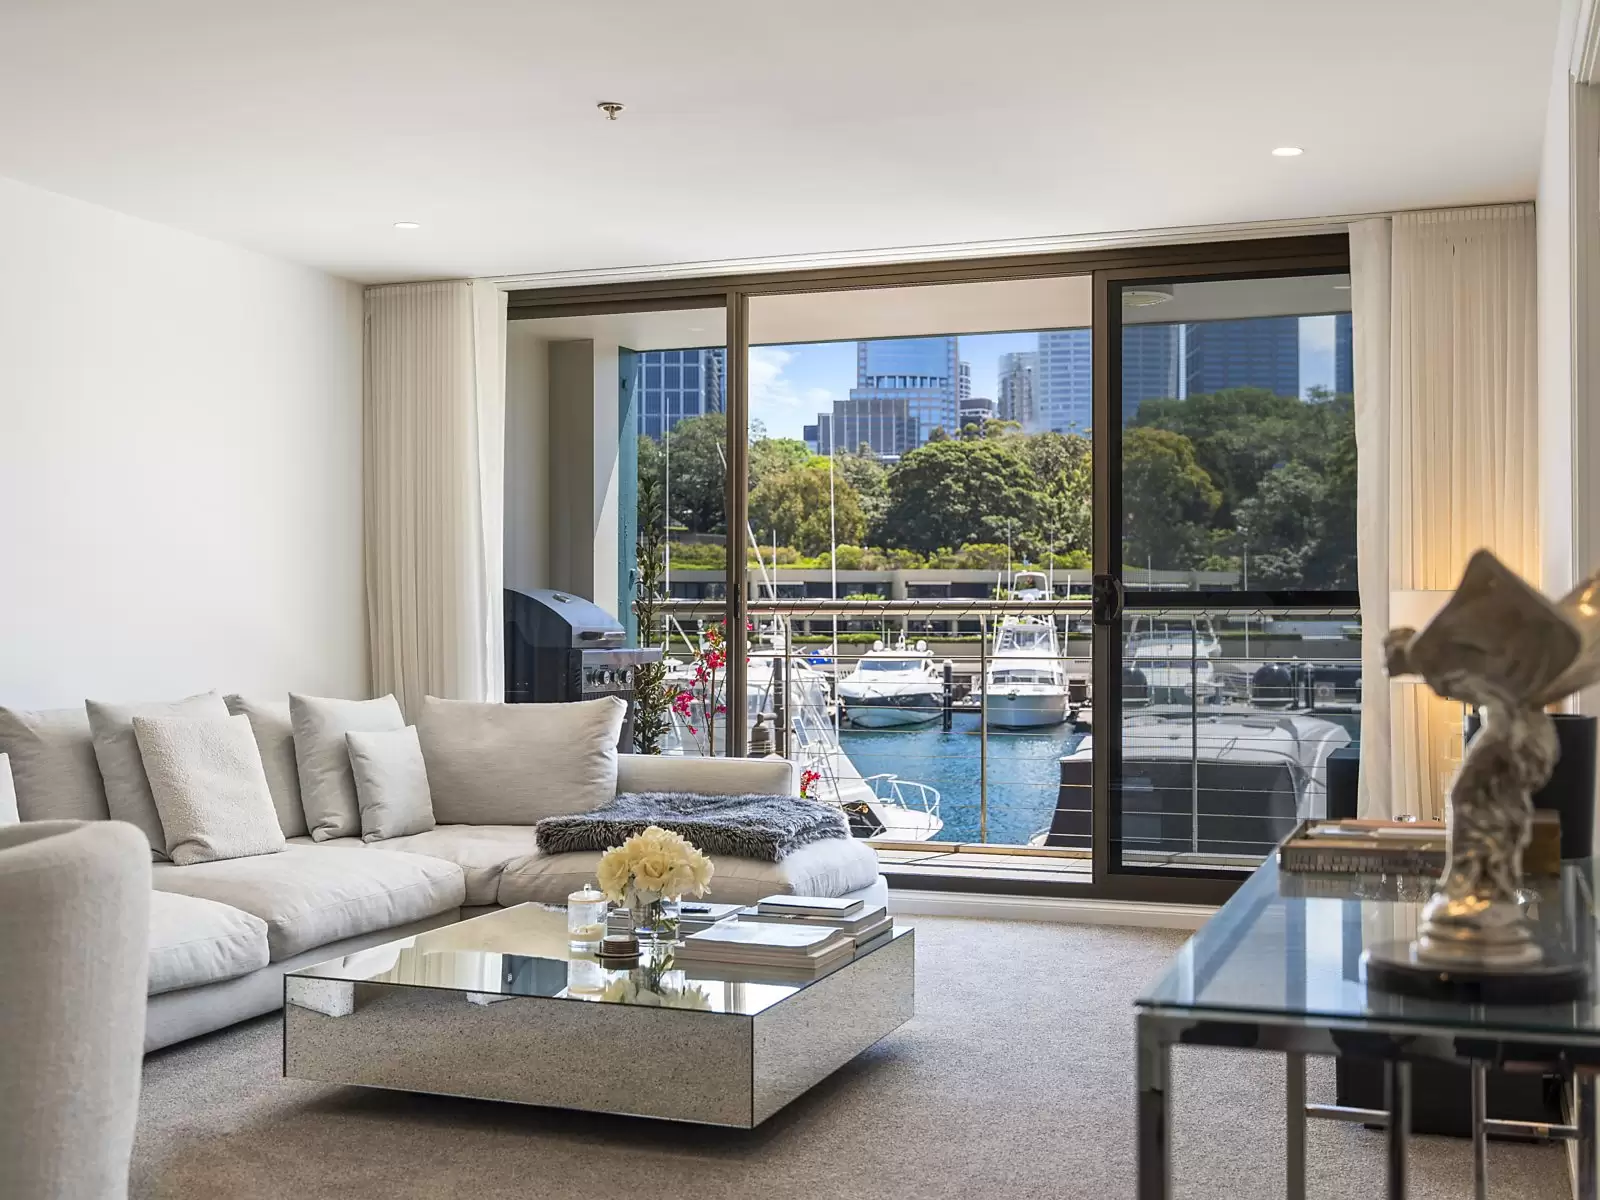 Photo #5: 212/6E Cowper Wharf Roadway, Woolloomooloo - For Sale by Sydney Sotheby's International Realty